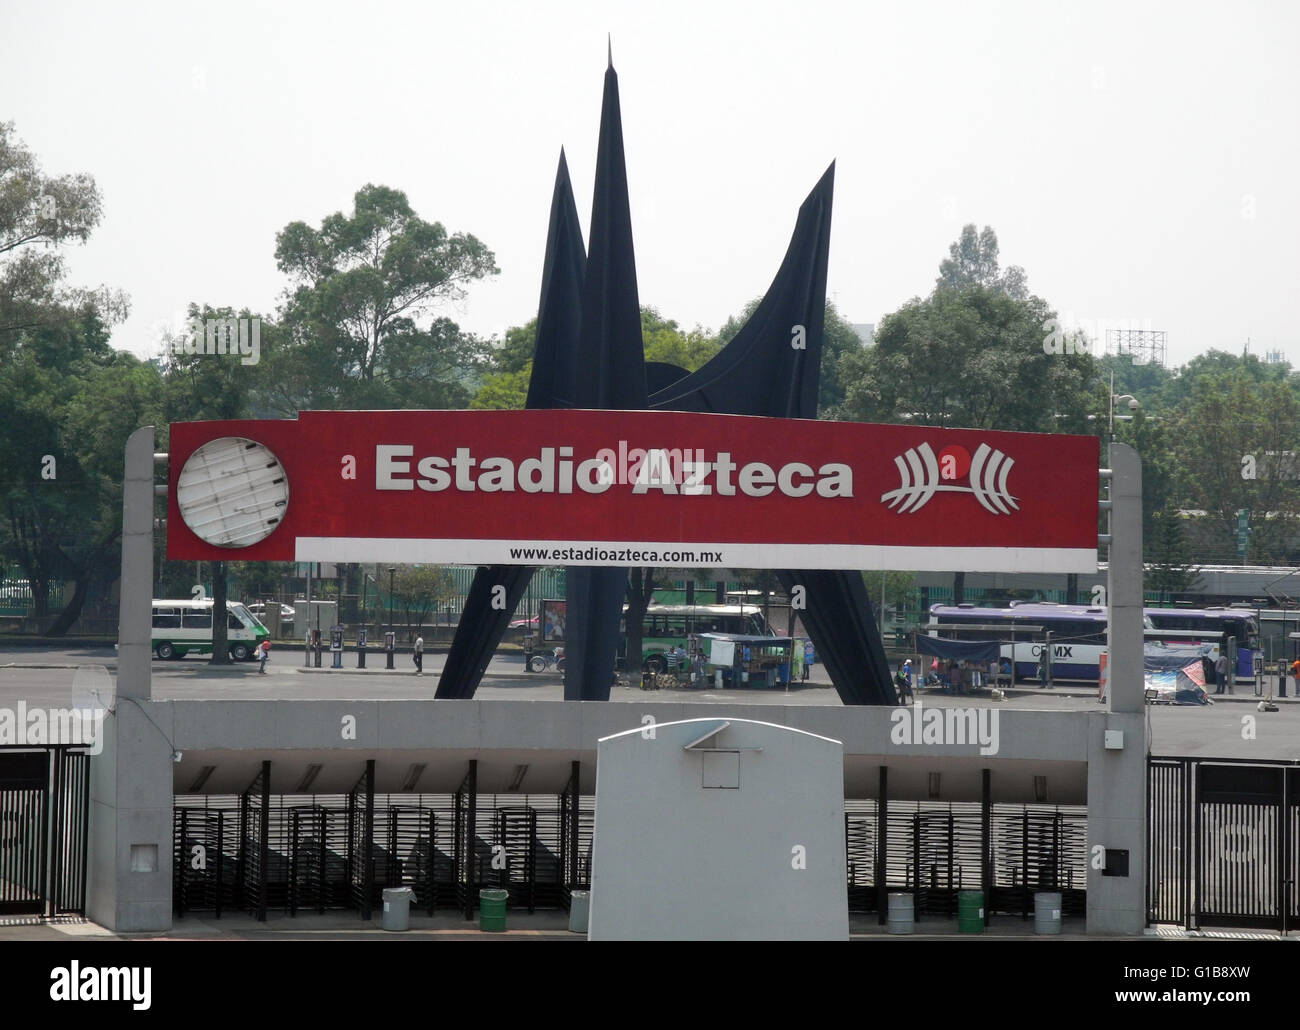 Mexico City, Mexico. 4th May, 2016. The entrance to the Estadio Azteca in Mexico City, Mexico, 4 May 2016. The Estadio Azteca opened in 1966. Photo: Denis Duettmann/dpa/Alamy Live News Stock Photo